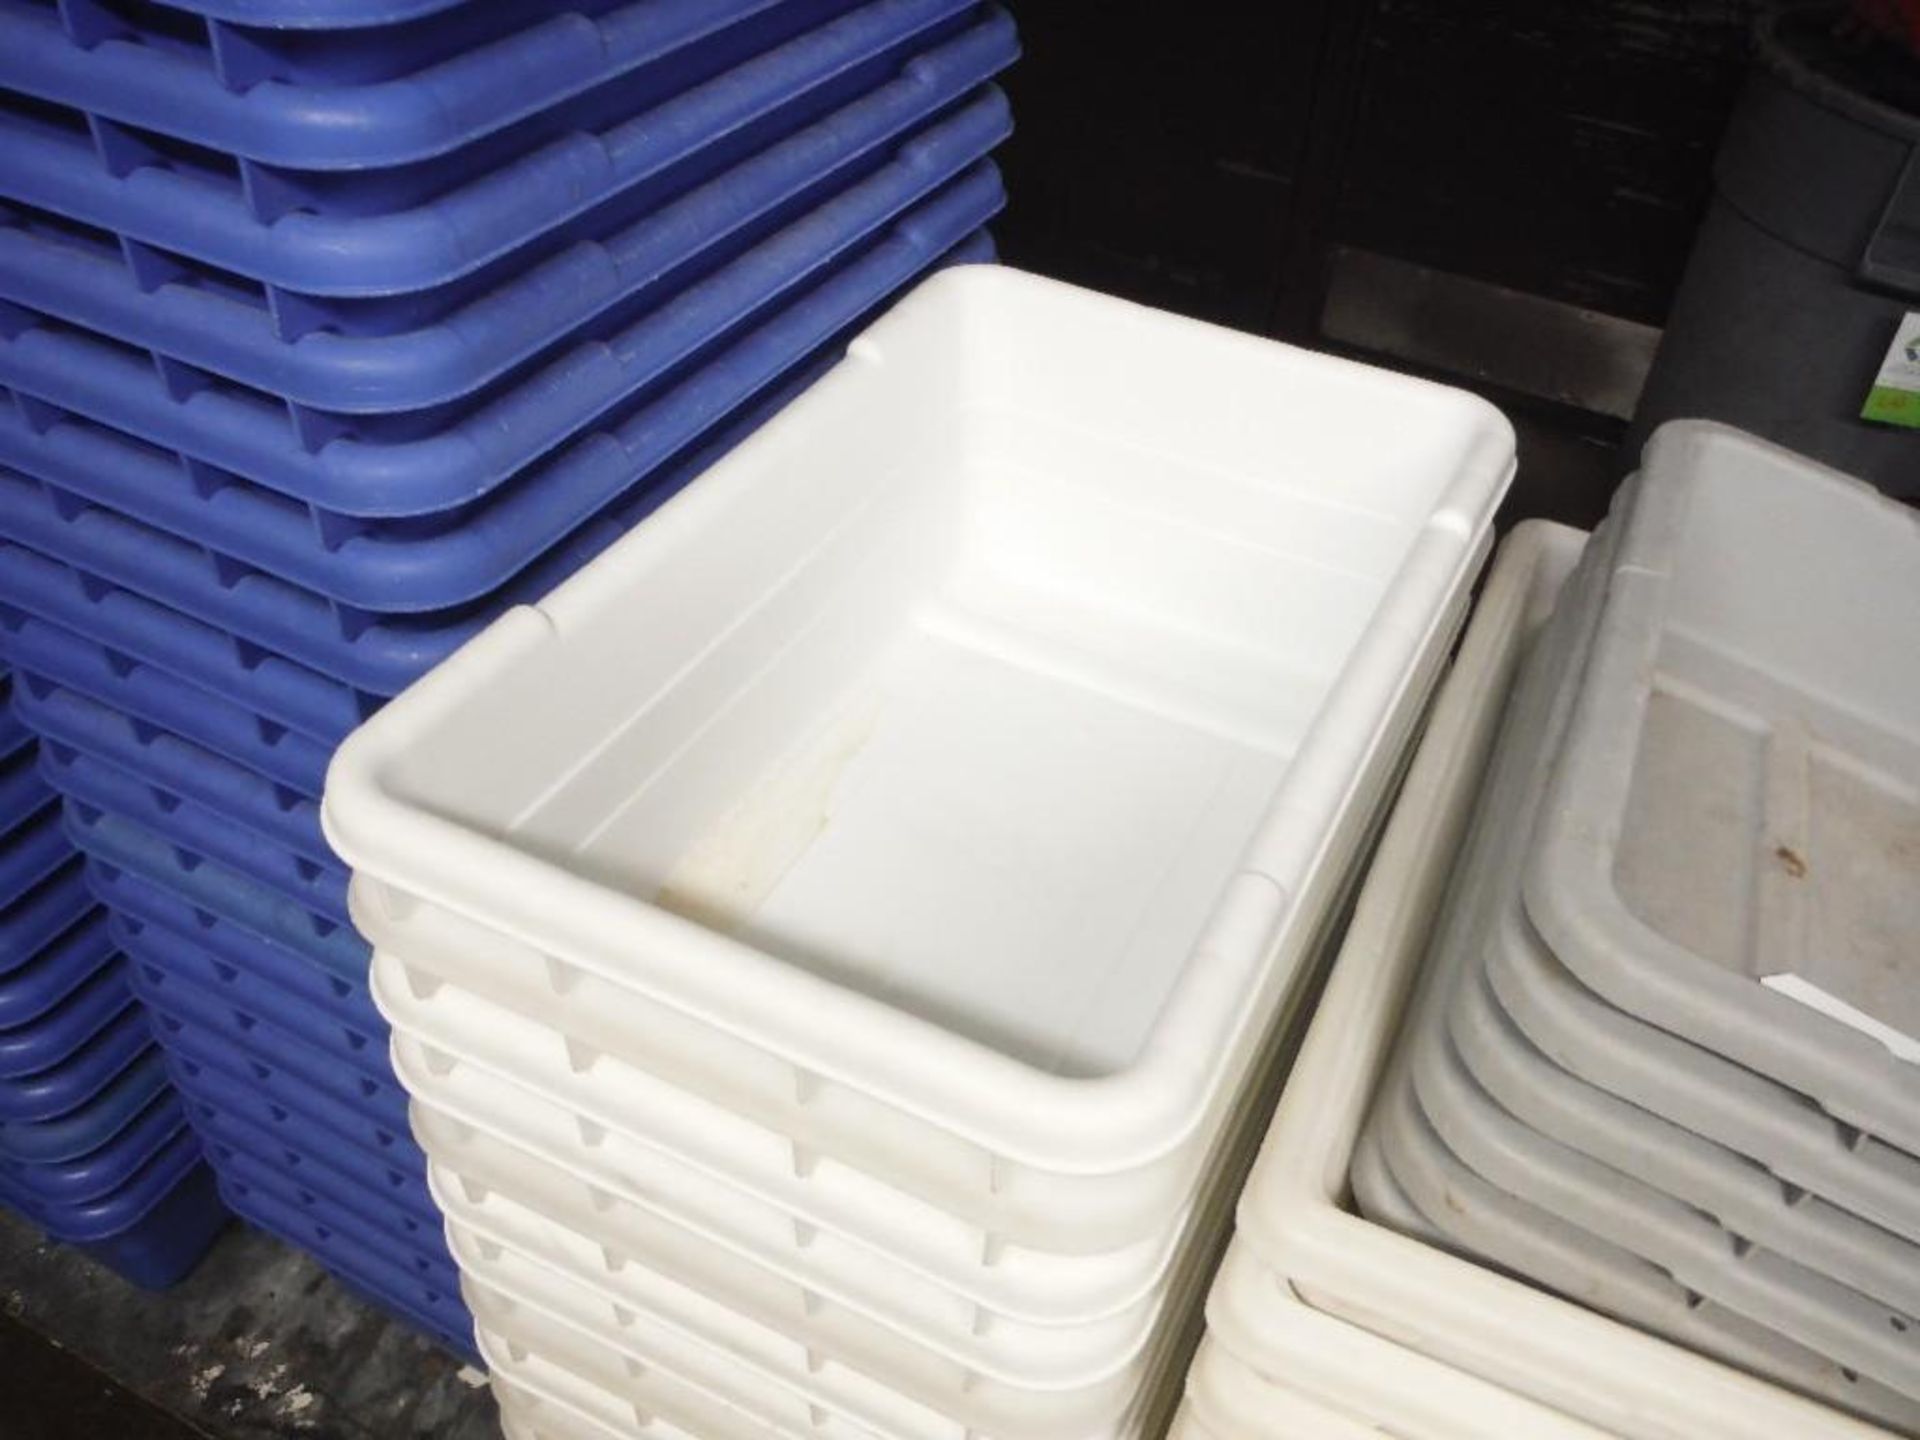 Lot of assorted blue and white poly totes, and cart - Rigging Fee: $75 - Image 2 of 4